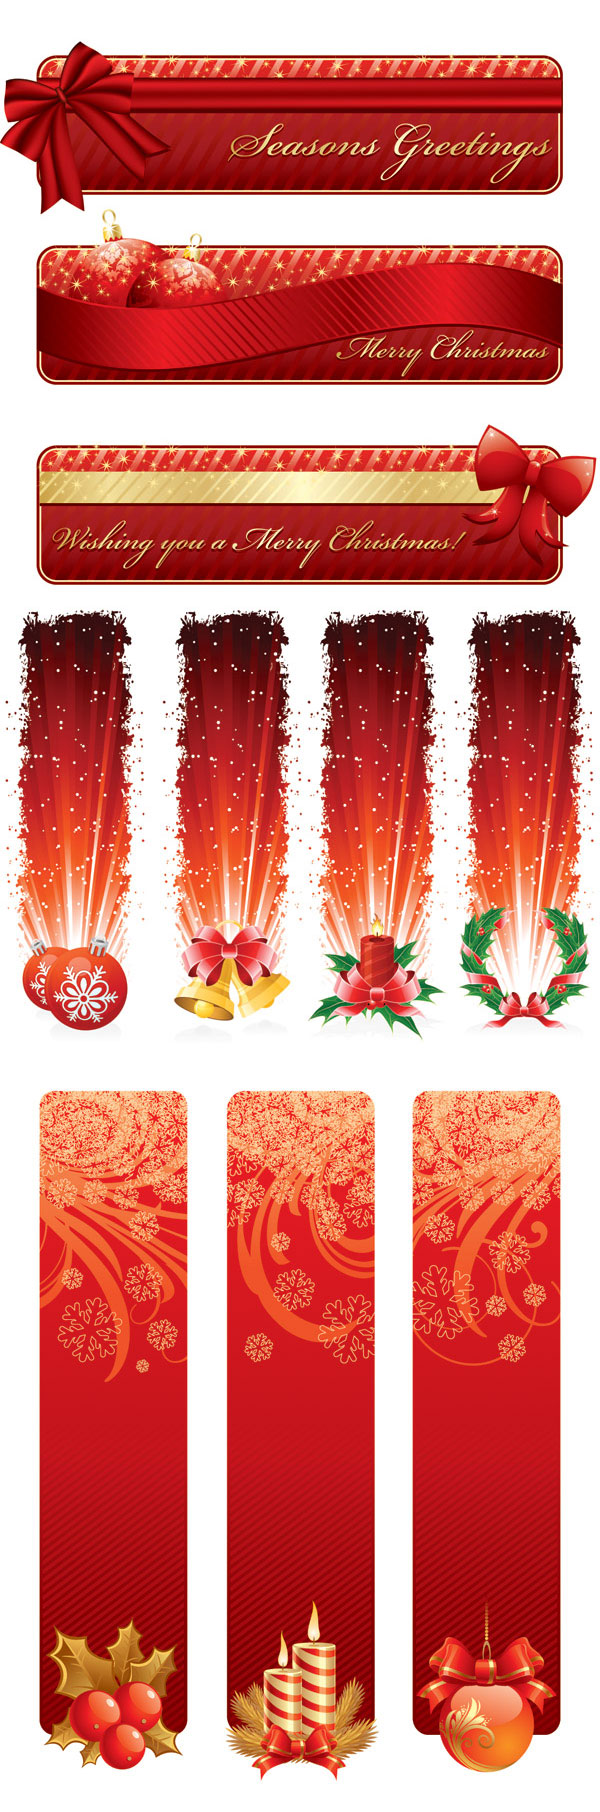 Red style holiday banner 